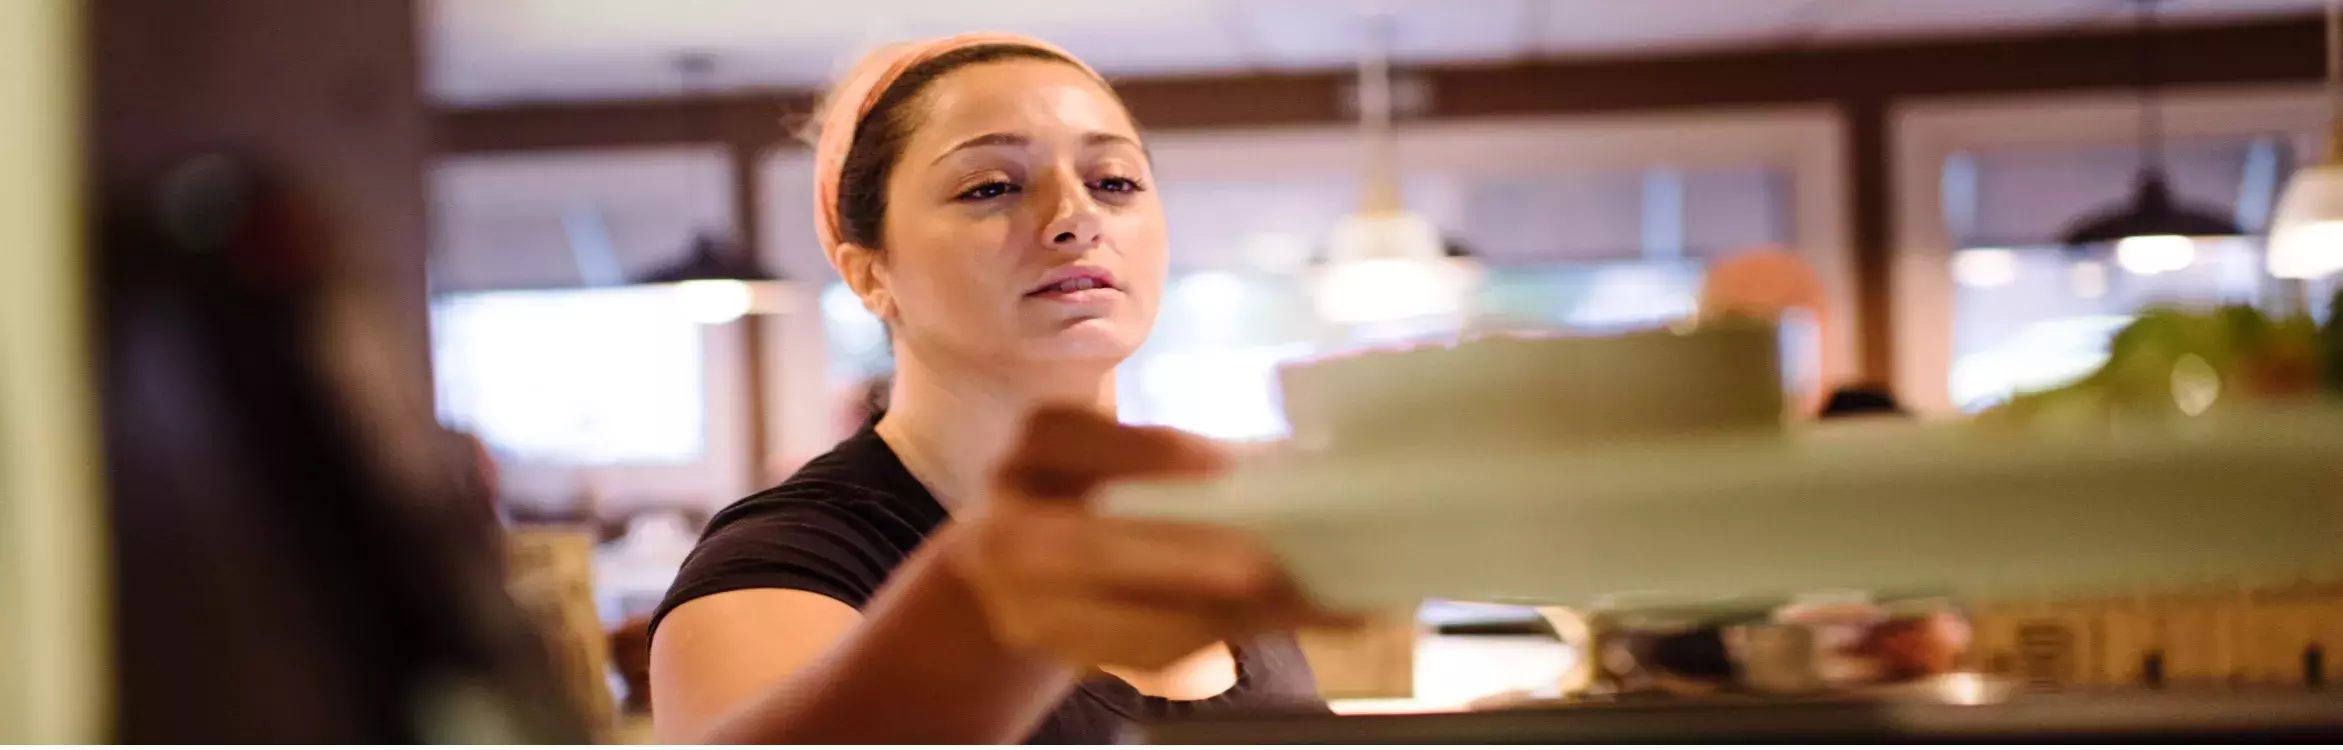 Waitress picking up a meal